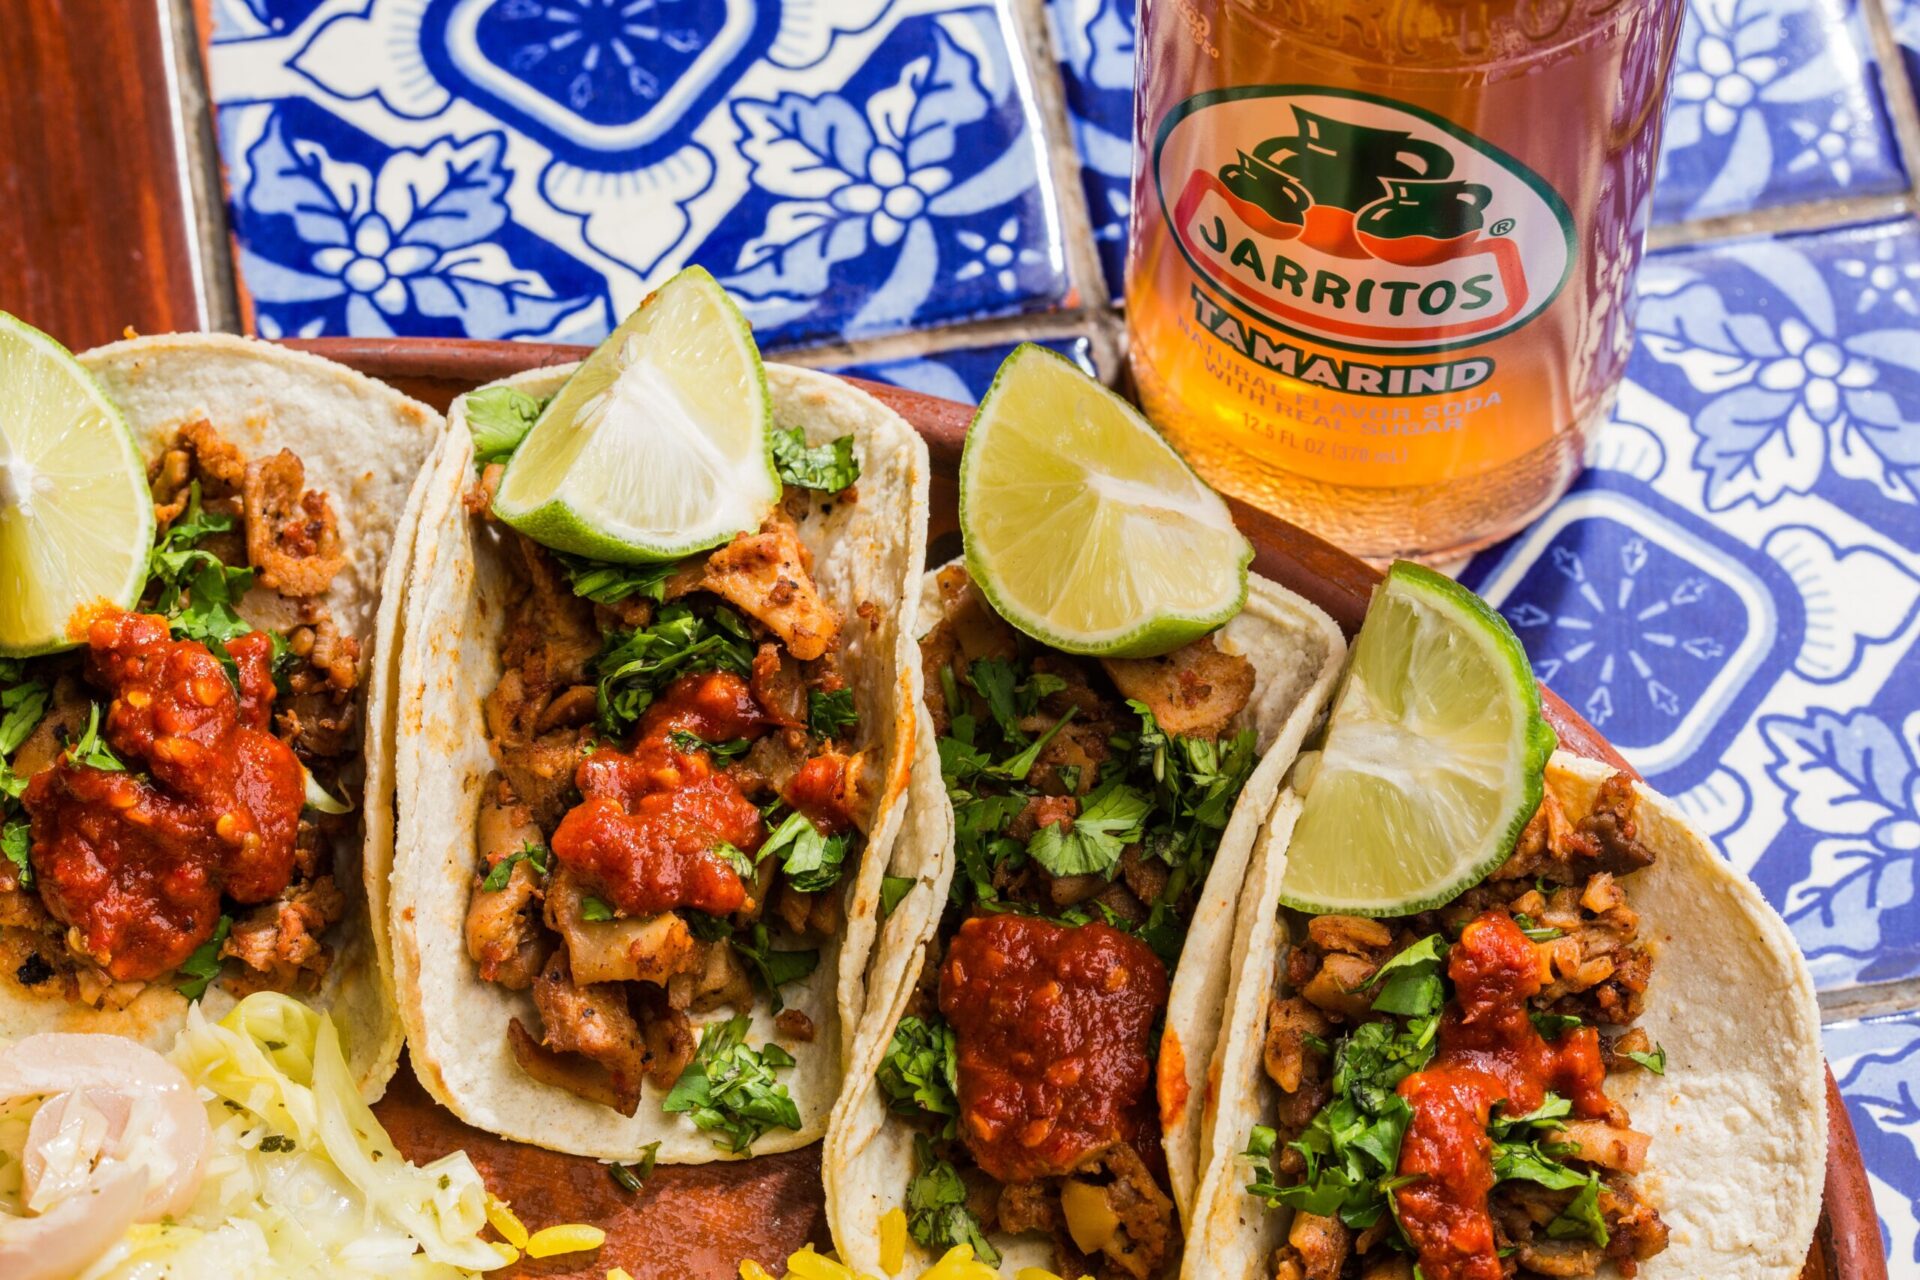 A plate of four tacos with lime slices sits on a table next to an orange Mexican soda.